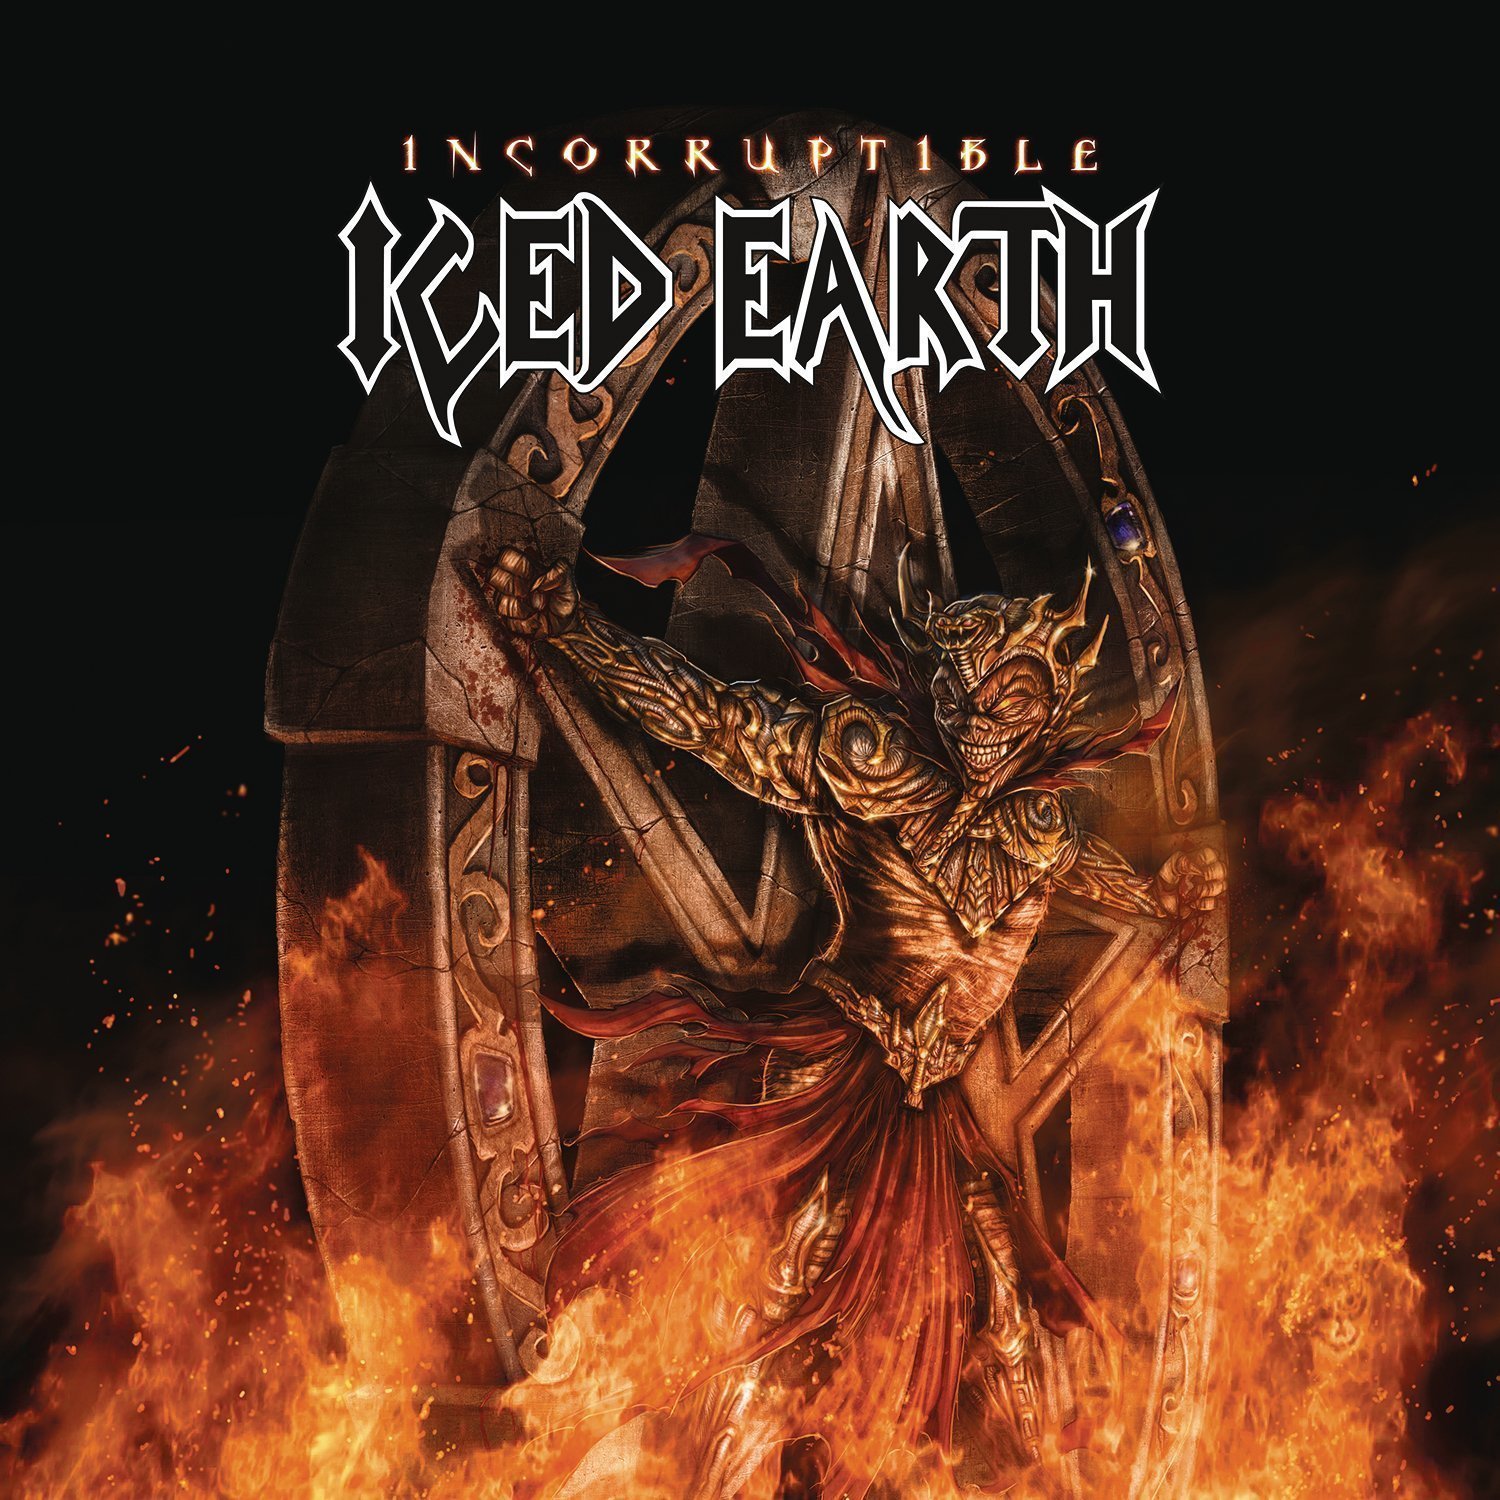 Vinyl Record Iced Earth Incorruptible (2 LP)